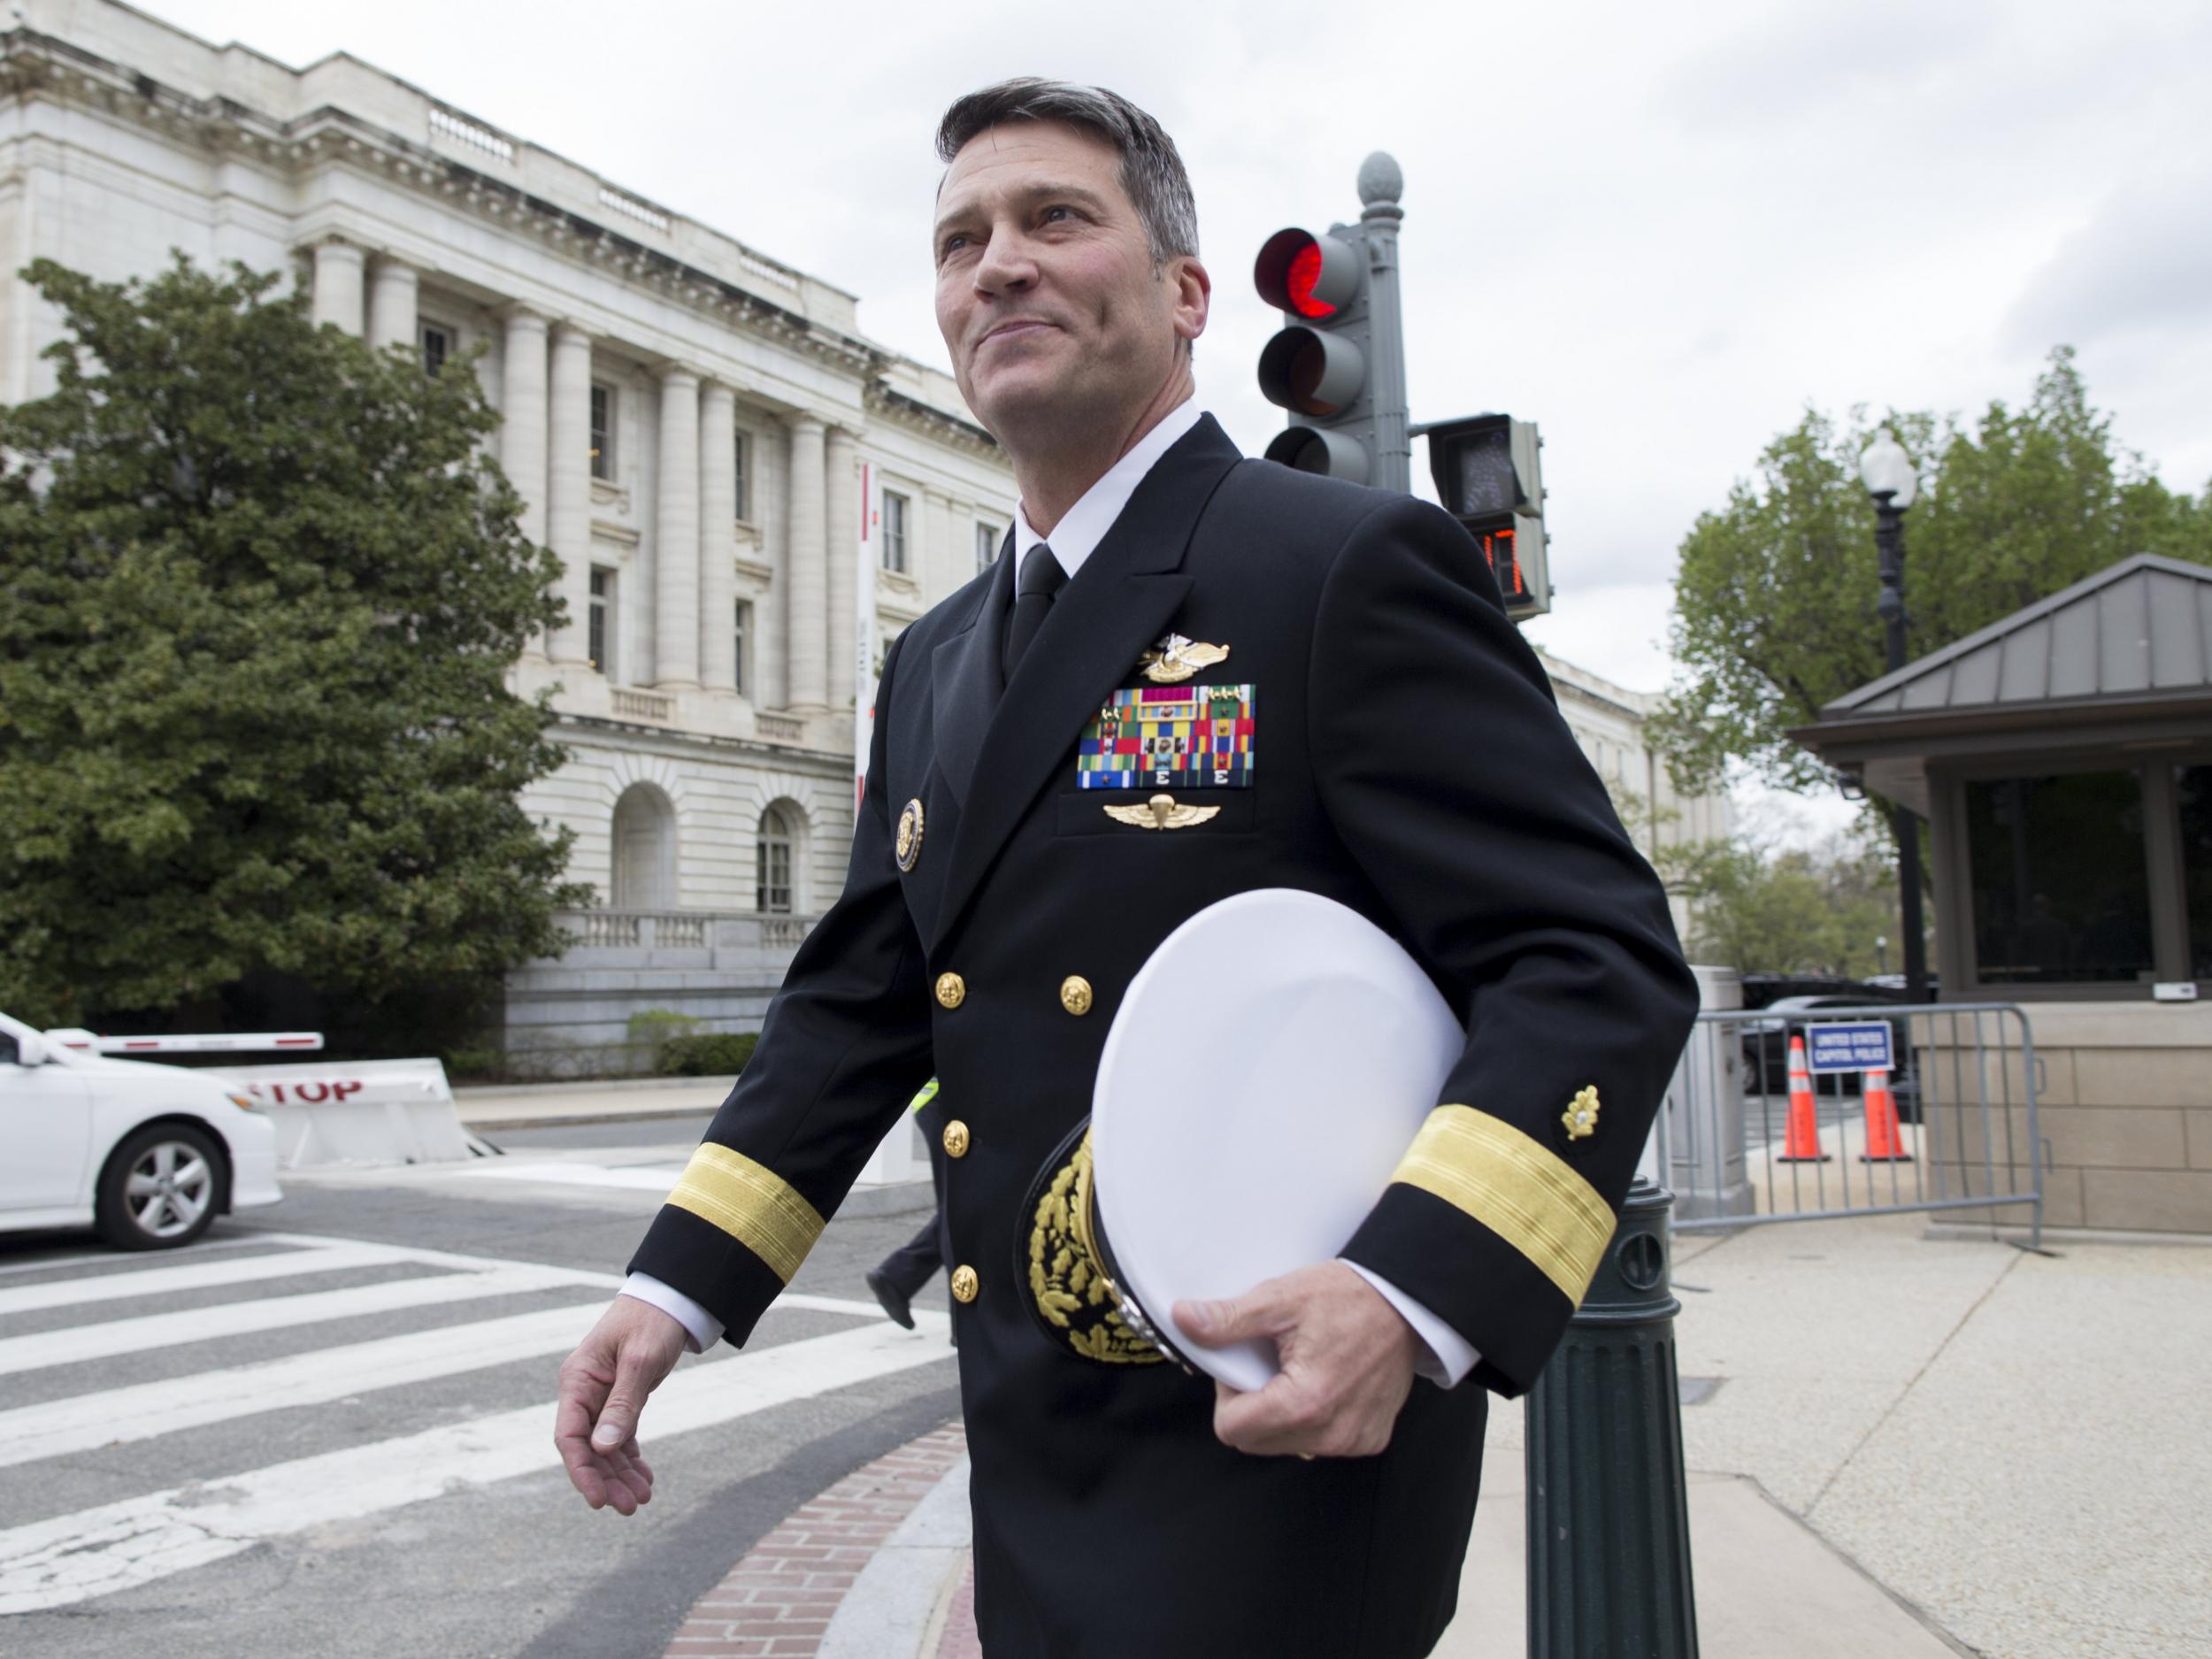 Admiral Ronny Jackson, the White House doctor, has come under fire during his bid to be confirmed as head of Veterans' Affairs